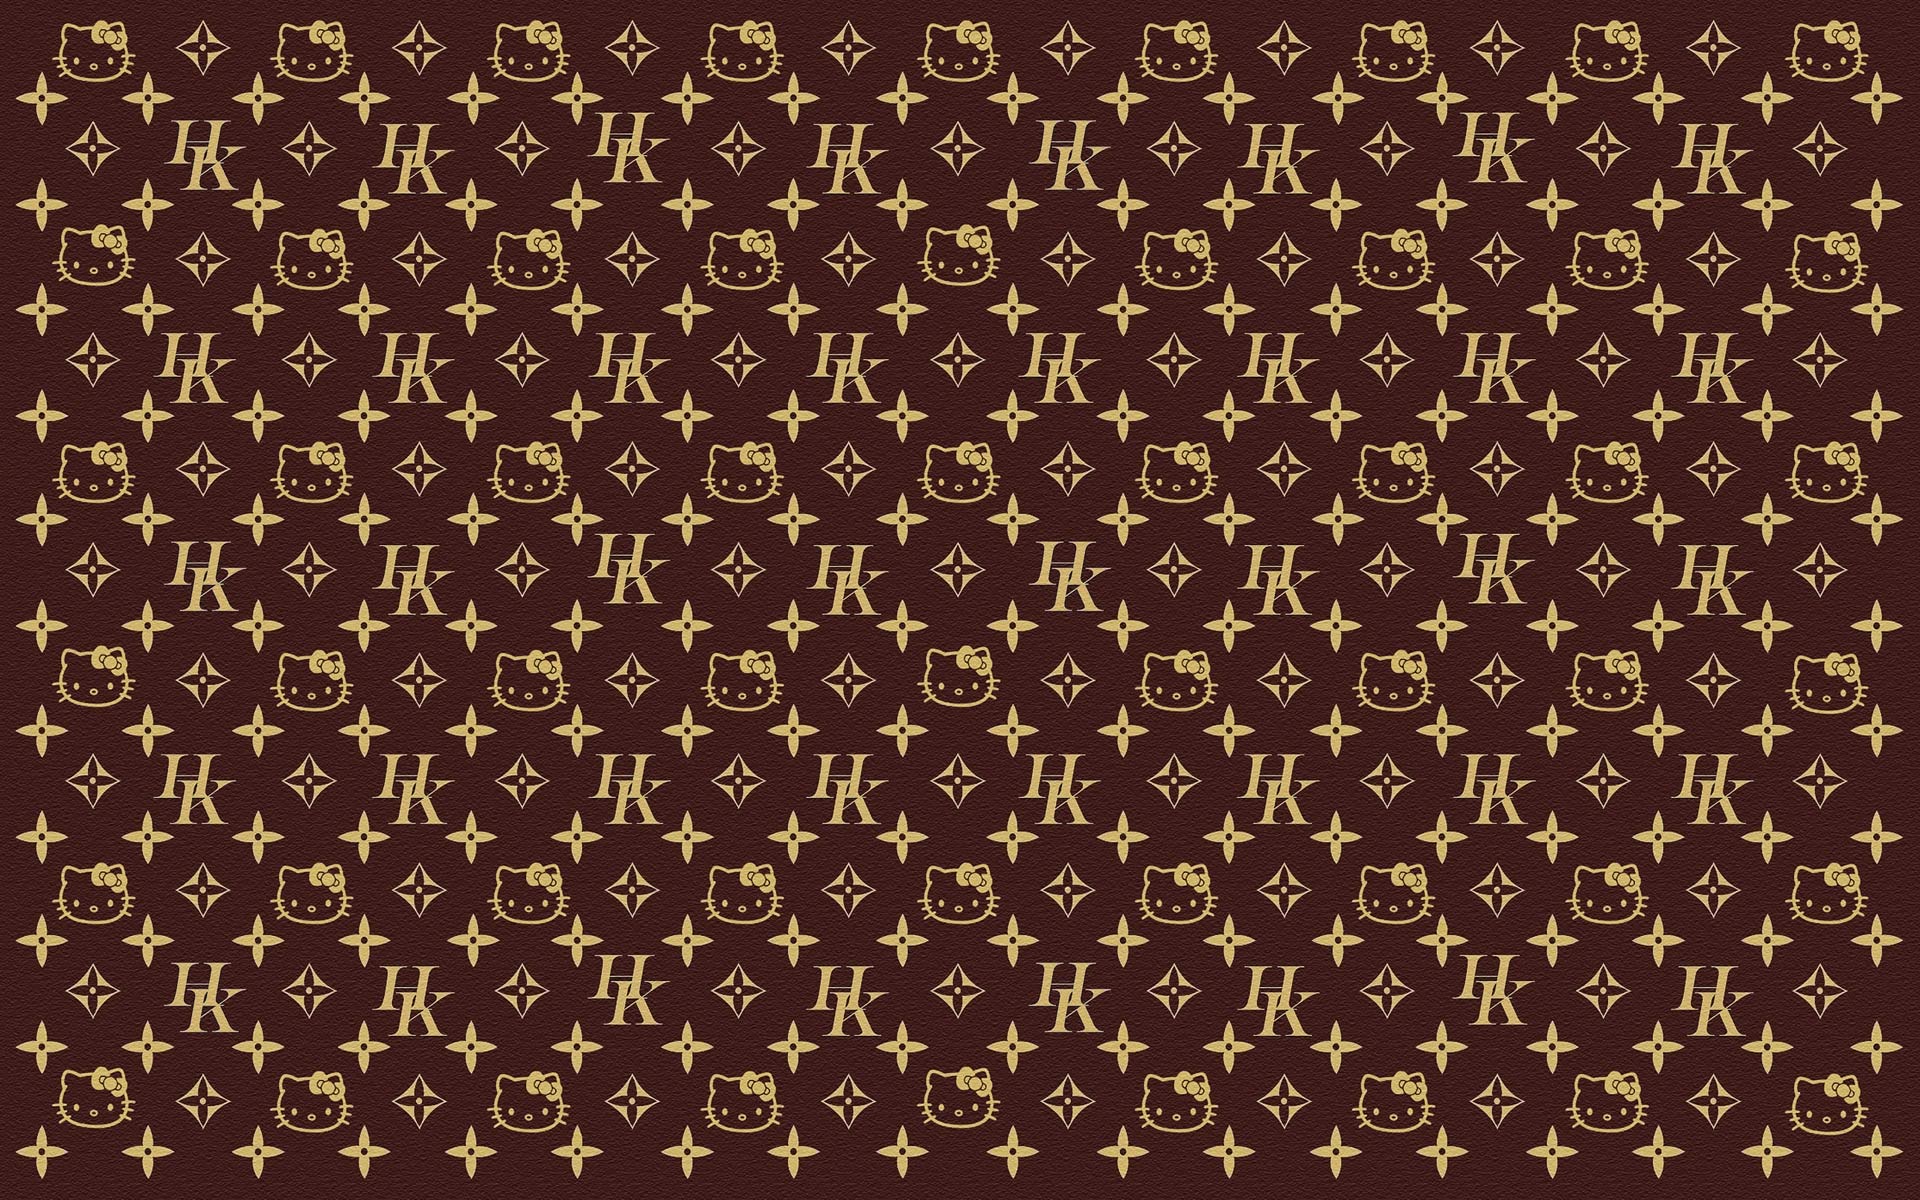 Aesthetic Louis Vuitton Wallpapers - Wallpaper Cave  Hello kitty wallpaper  hd, Hello kitty iphone wallpaper, Hello kitty wallpaper